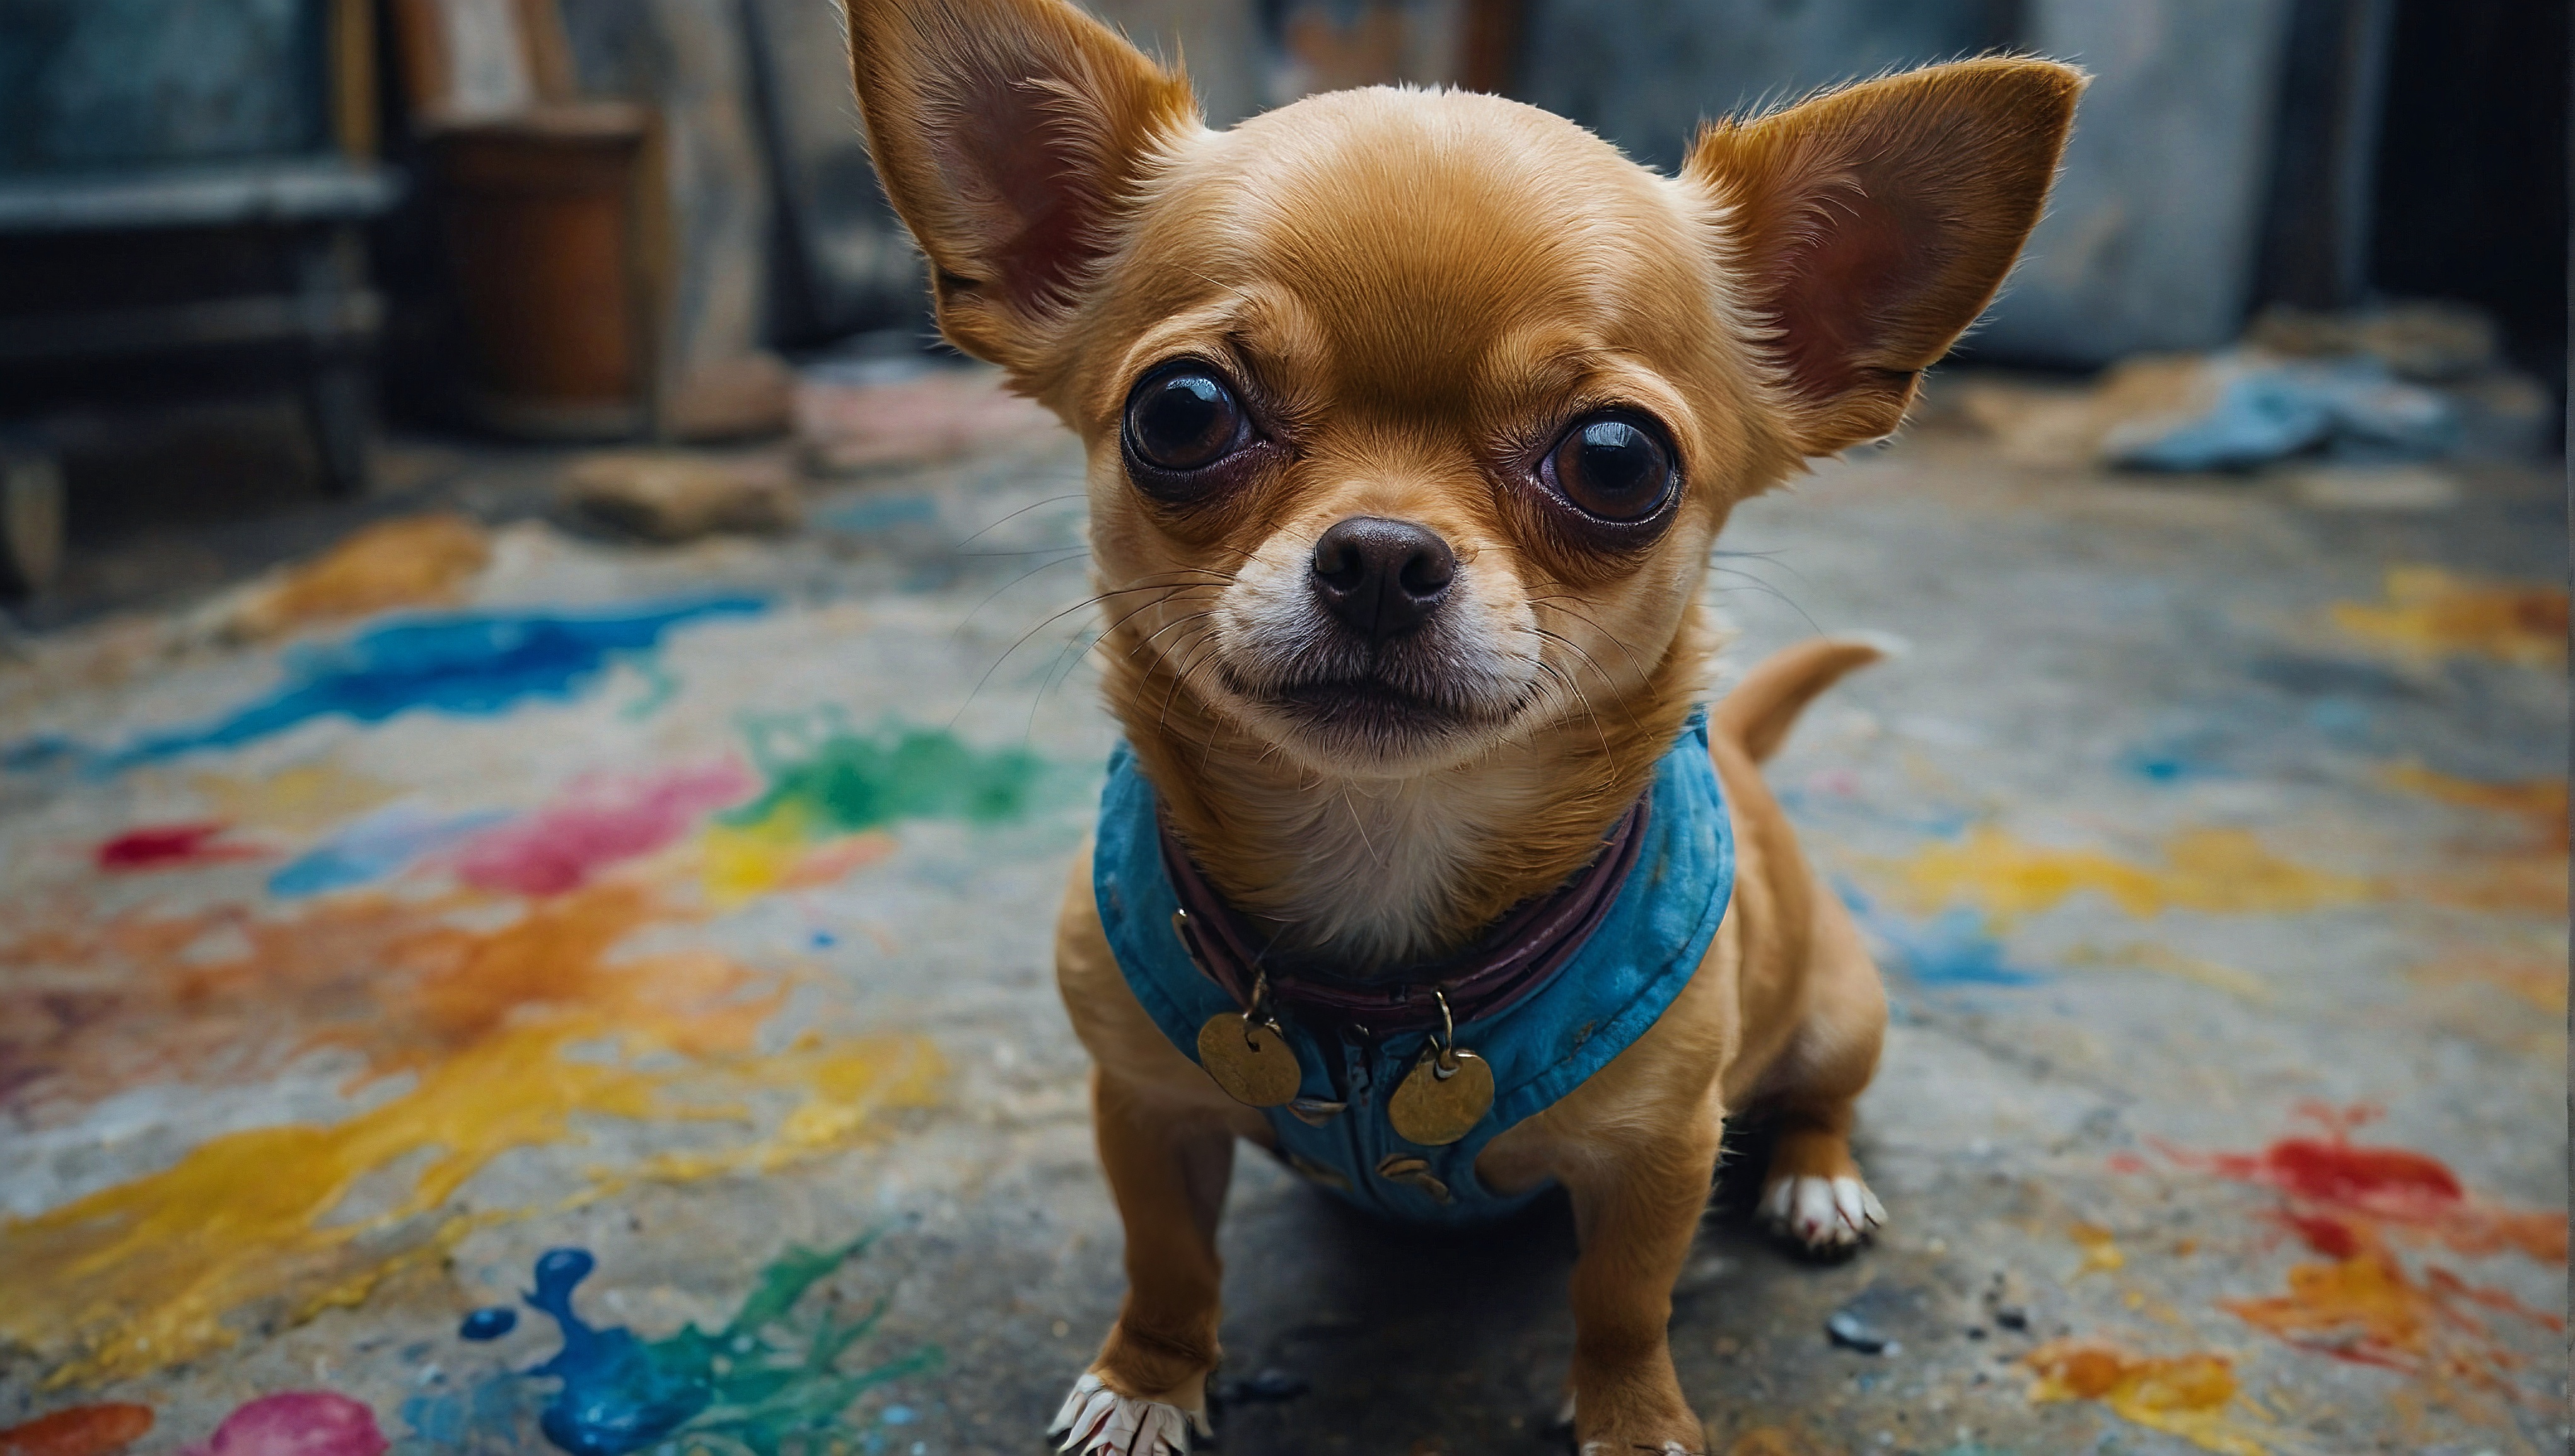 A small chihuahua with an ear ring on a carpeted floor